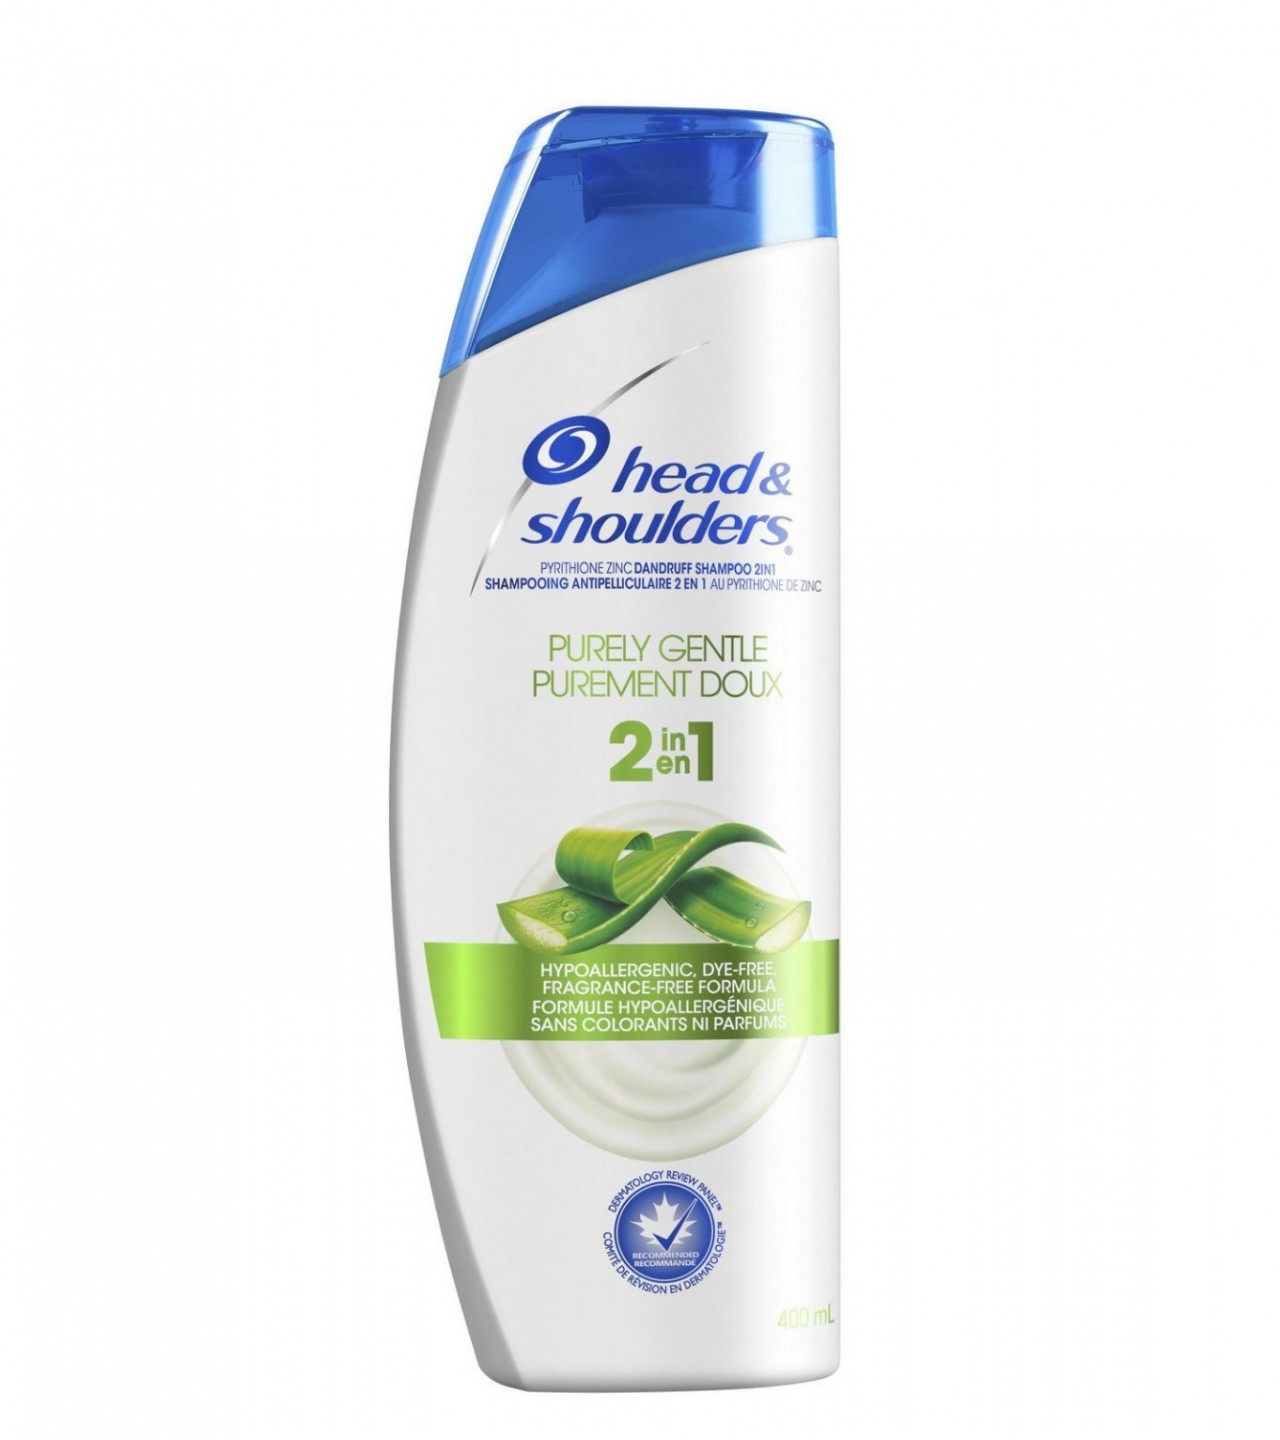 head & shoulders purely and gently shampoo 700ml